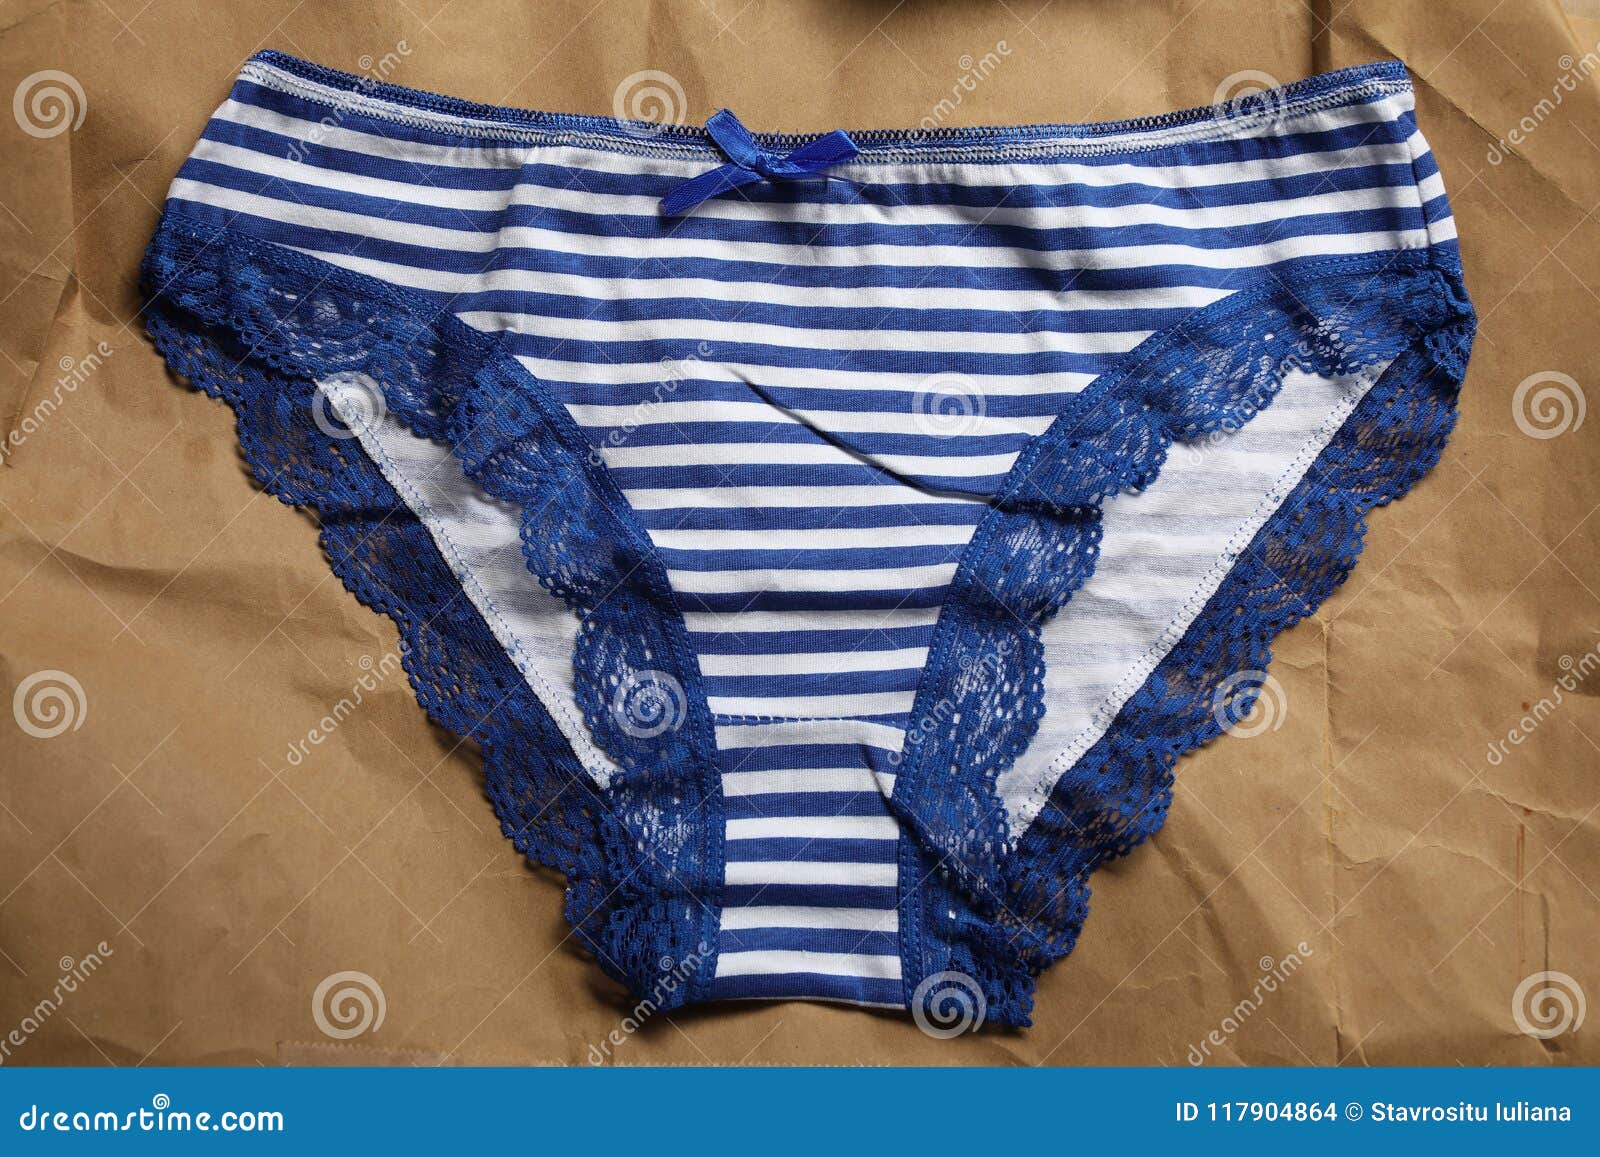 branko peric recommends blue and white striped panties pic